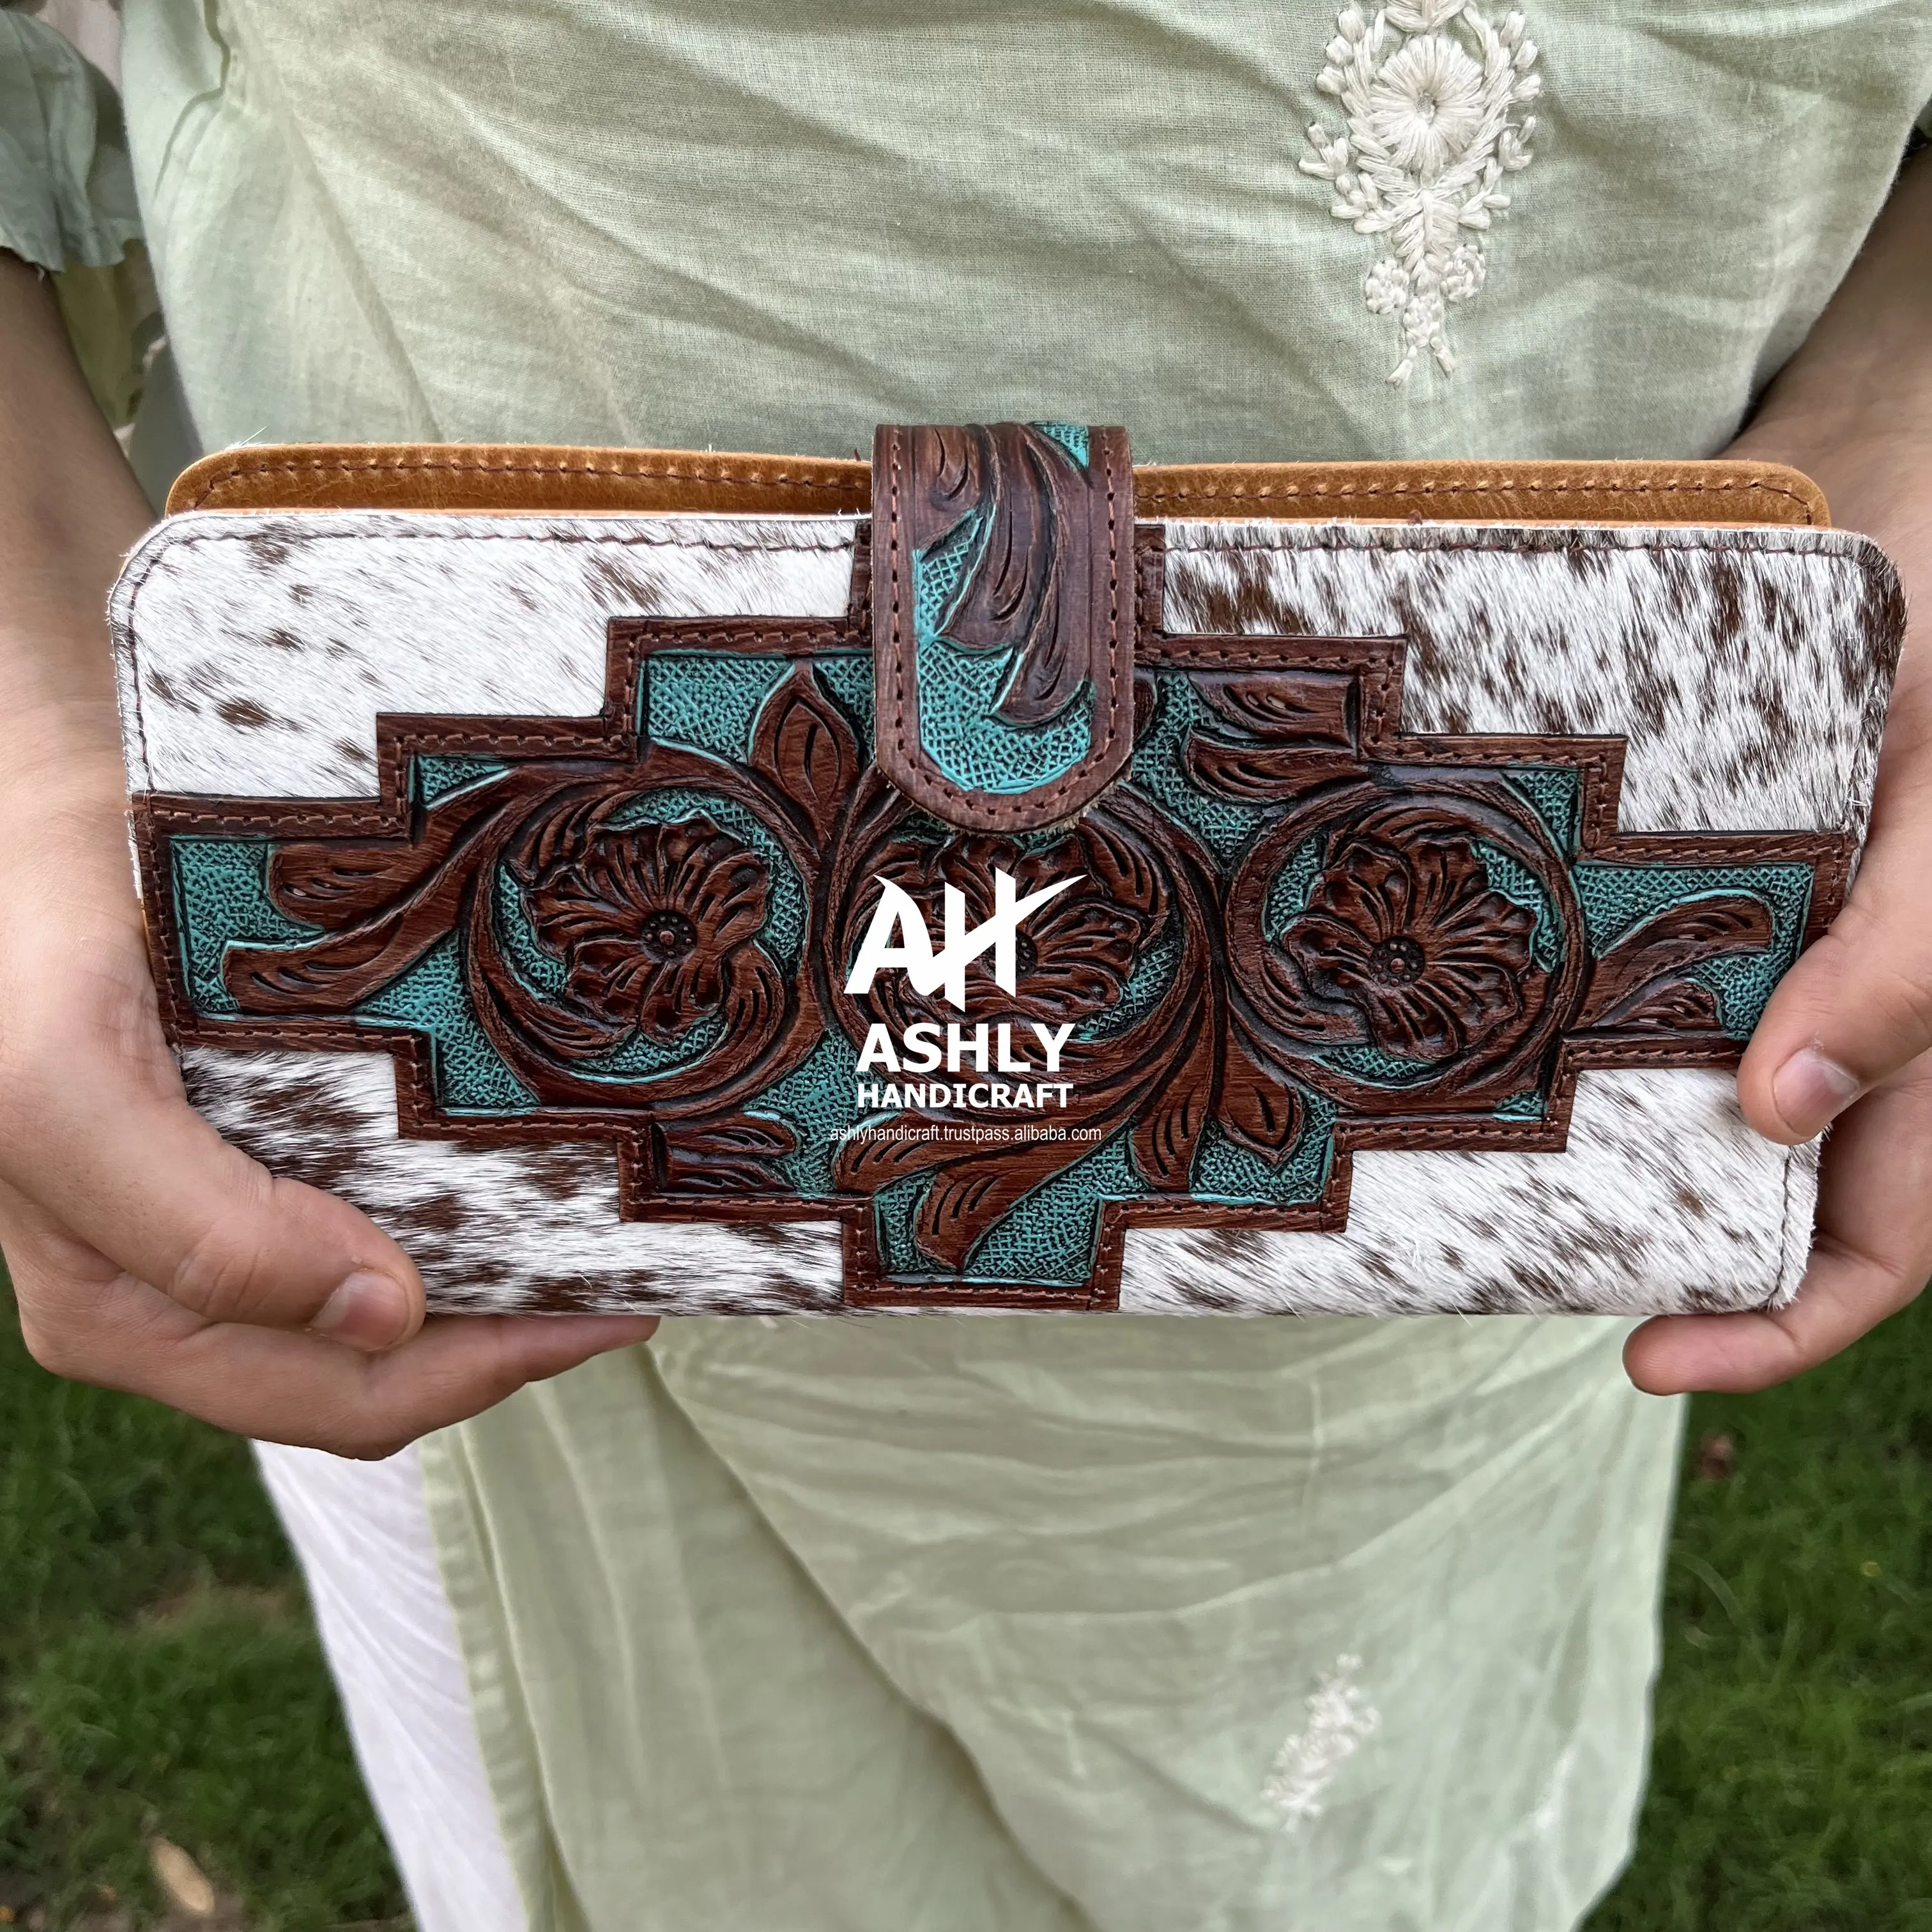 Tooled Leather Bag Cowhide Fur Leather Hand Clutch Wallet Hair on Leather Stylish women Hand clutch Western Design Handbag